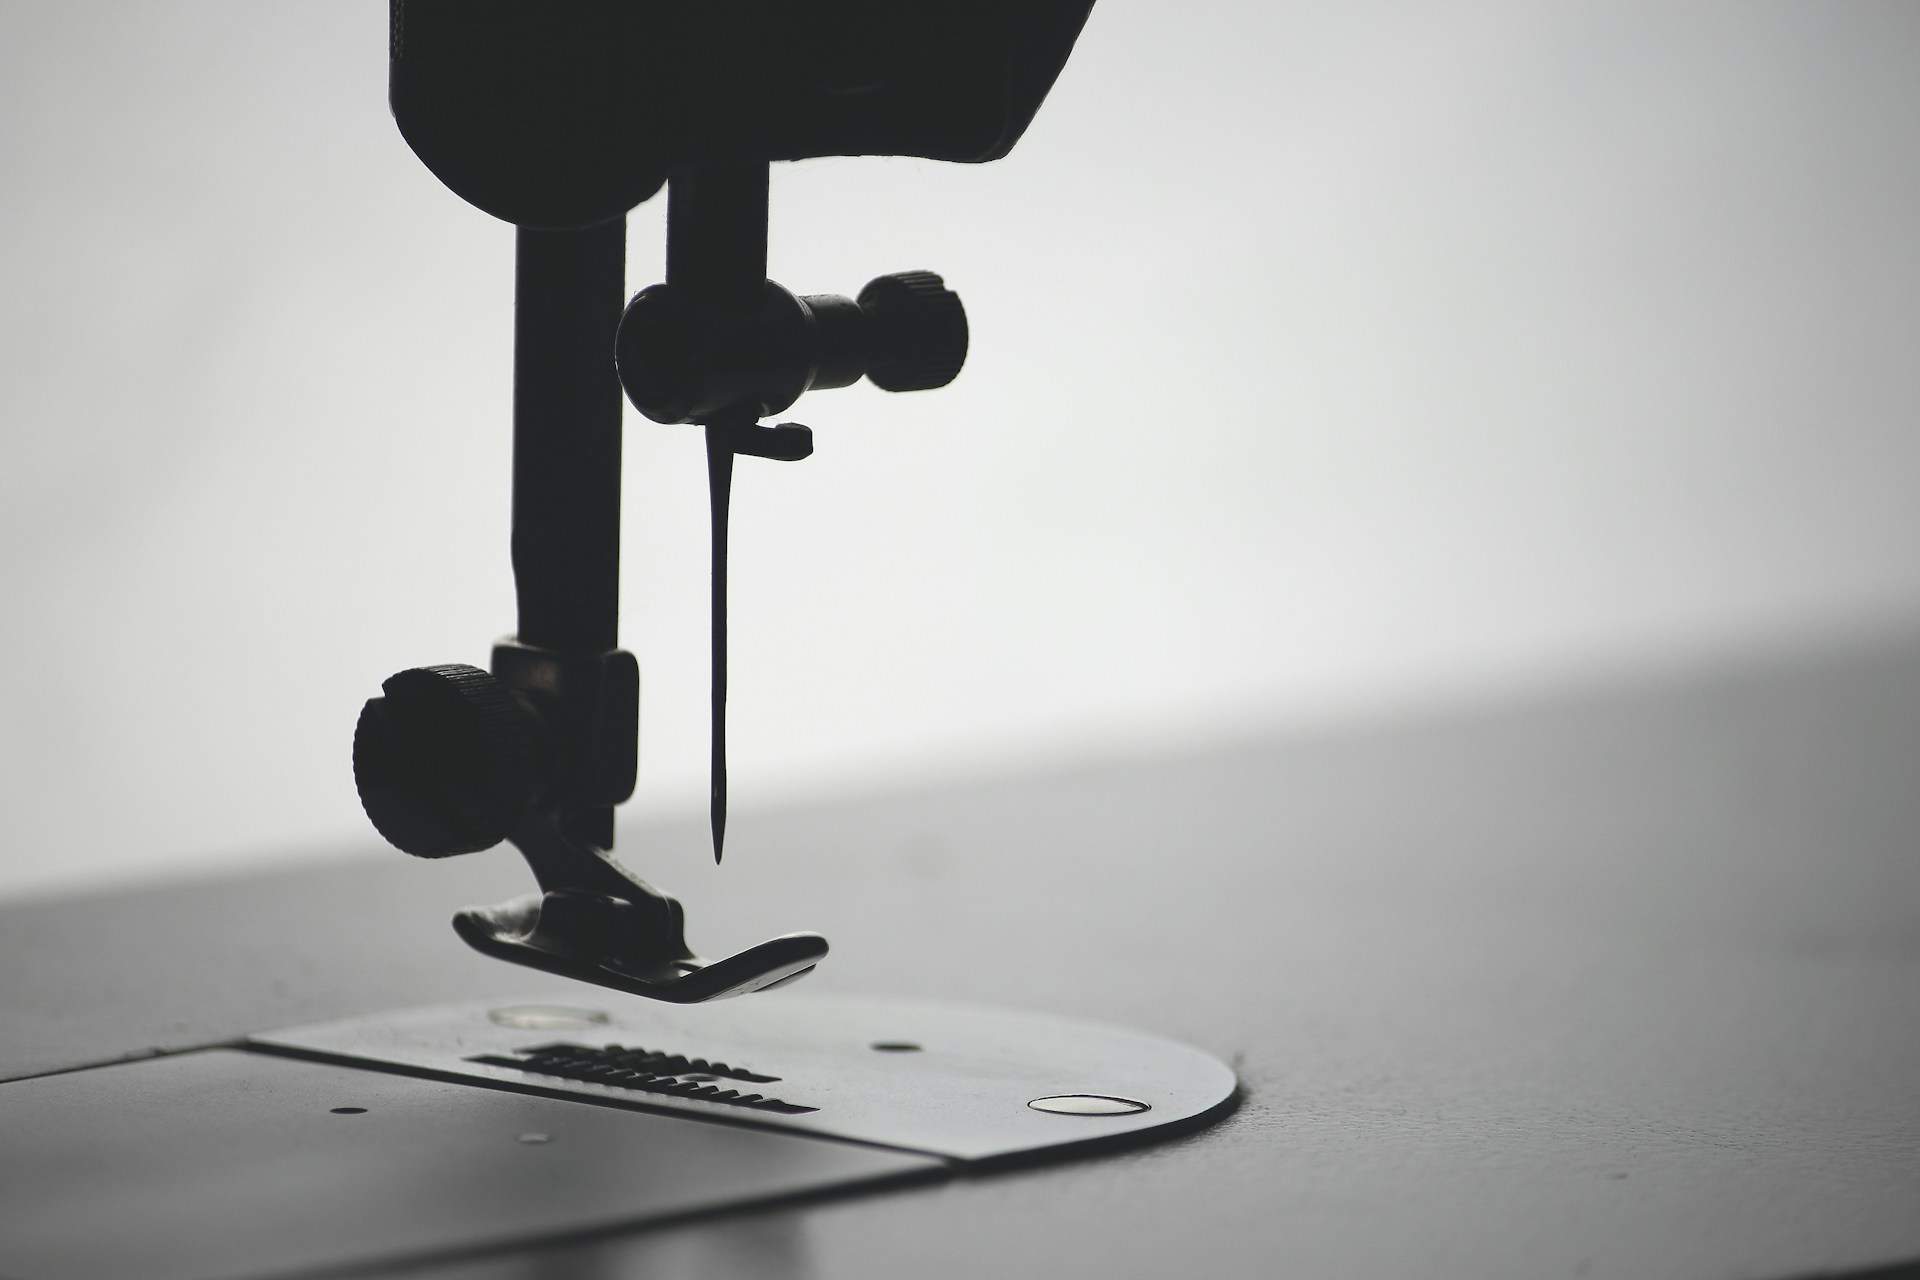 Affordable Sewing machine for starting a low-capital business idea